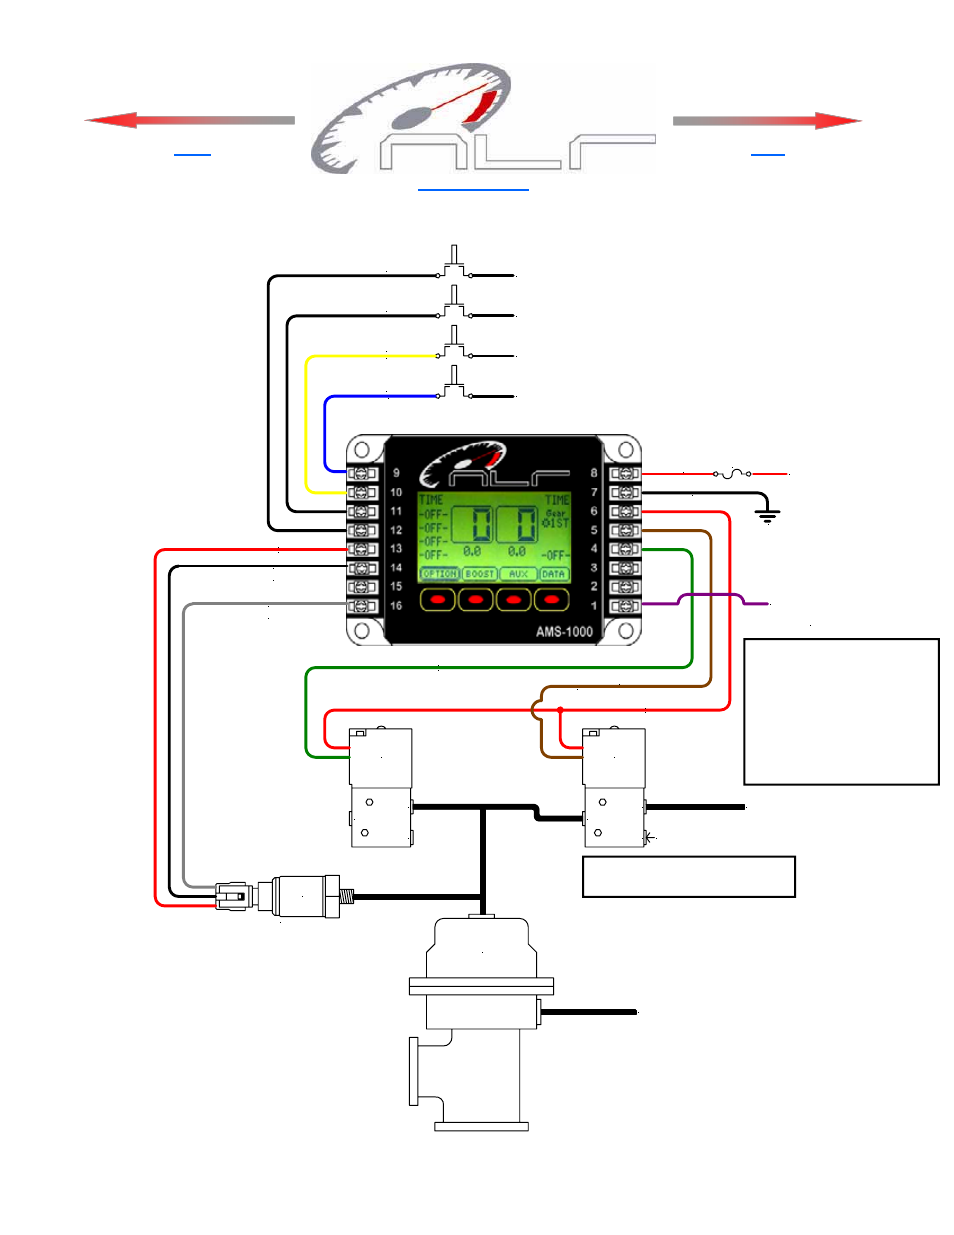 Wiring and plumbing diagram, boost channel, Wastegate, Ssi 60